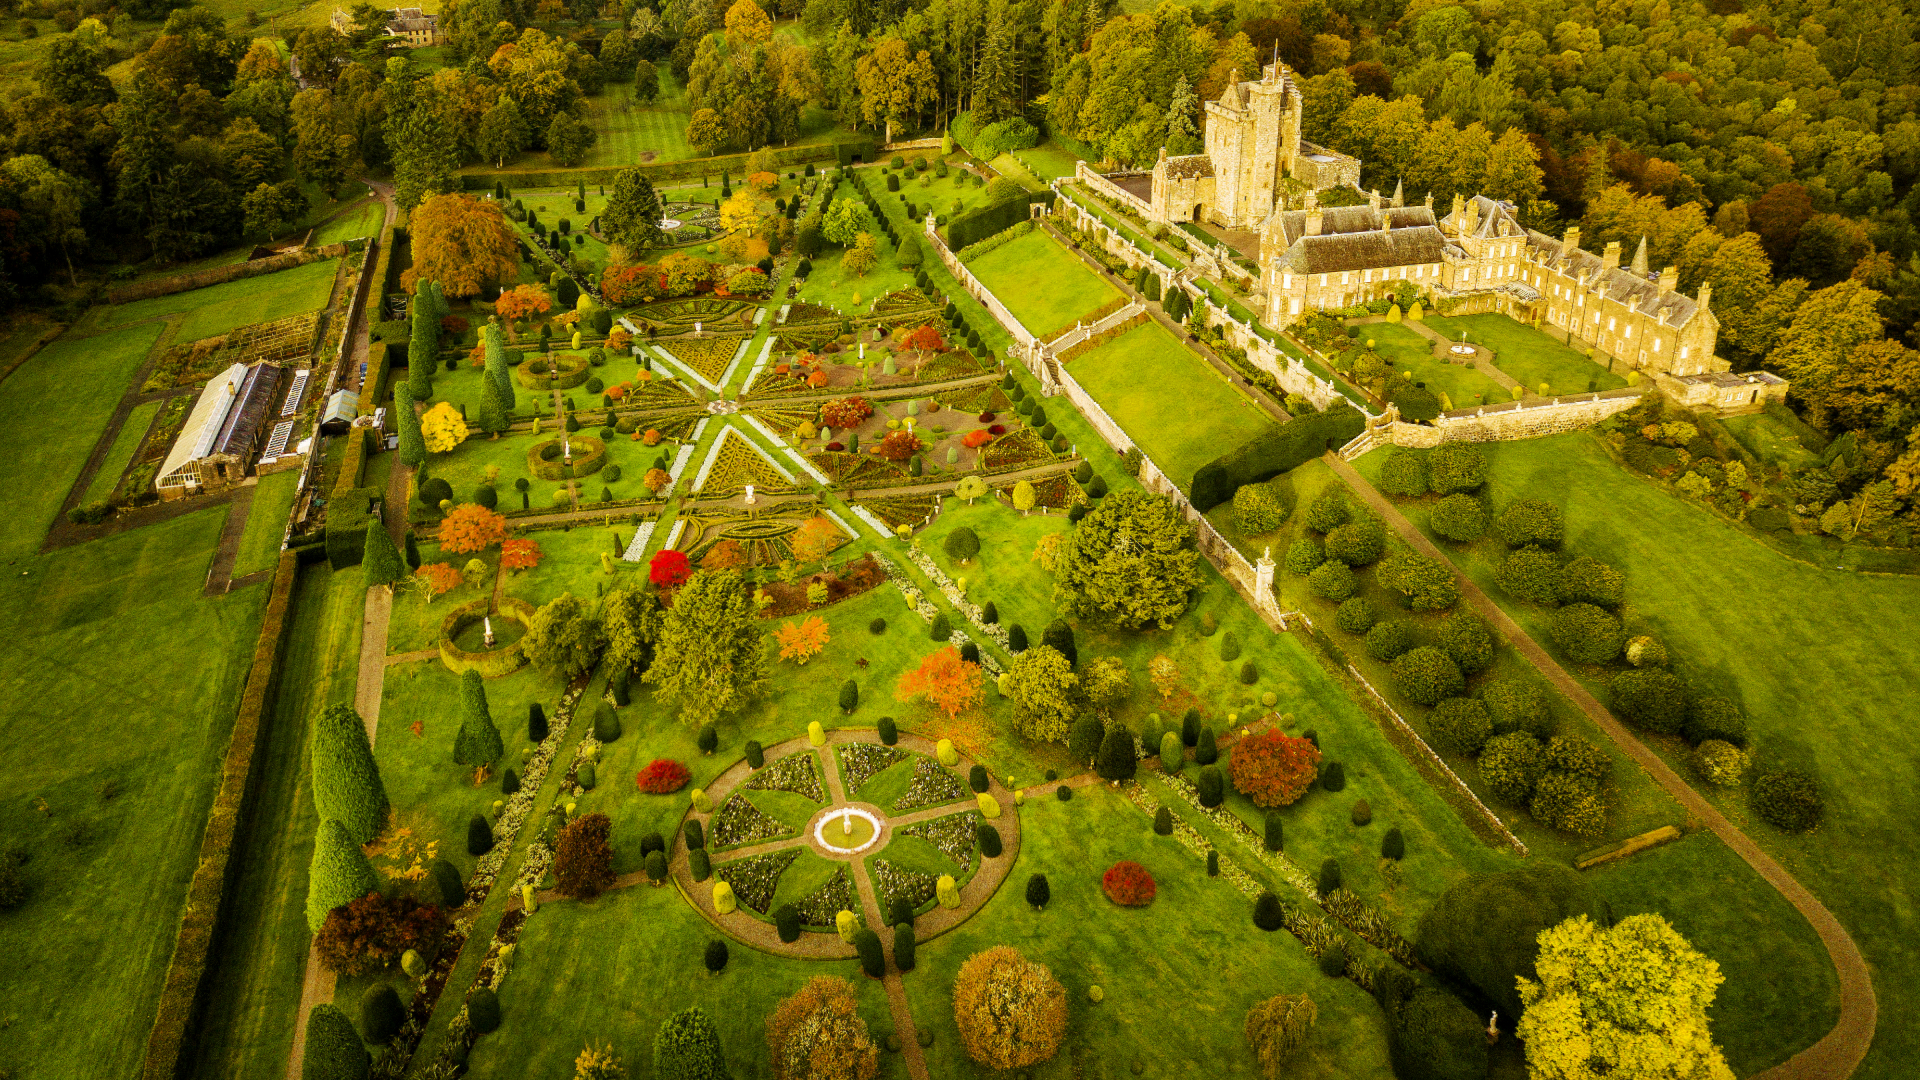 Aerial pictures of famous garden are weirdly satisfying.